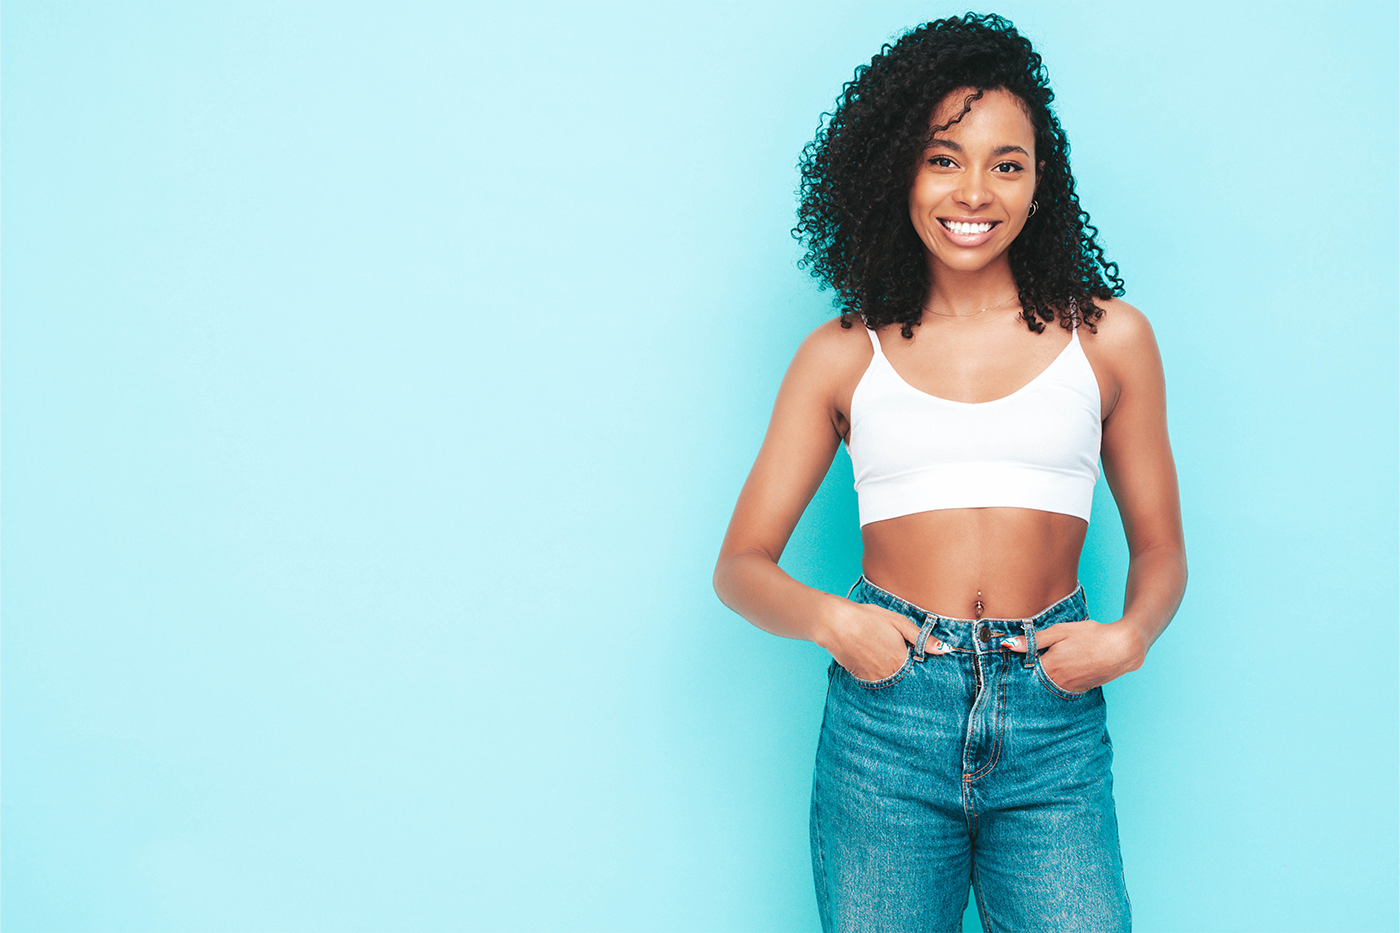 beautiful-black-woman-with-afro-curls-hairstyle-smiling-model-dressed-white-top-jeans-sexy-carefree-female-posing-near-blue-wall-studio-tanned-cheerful-isolated